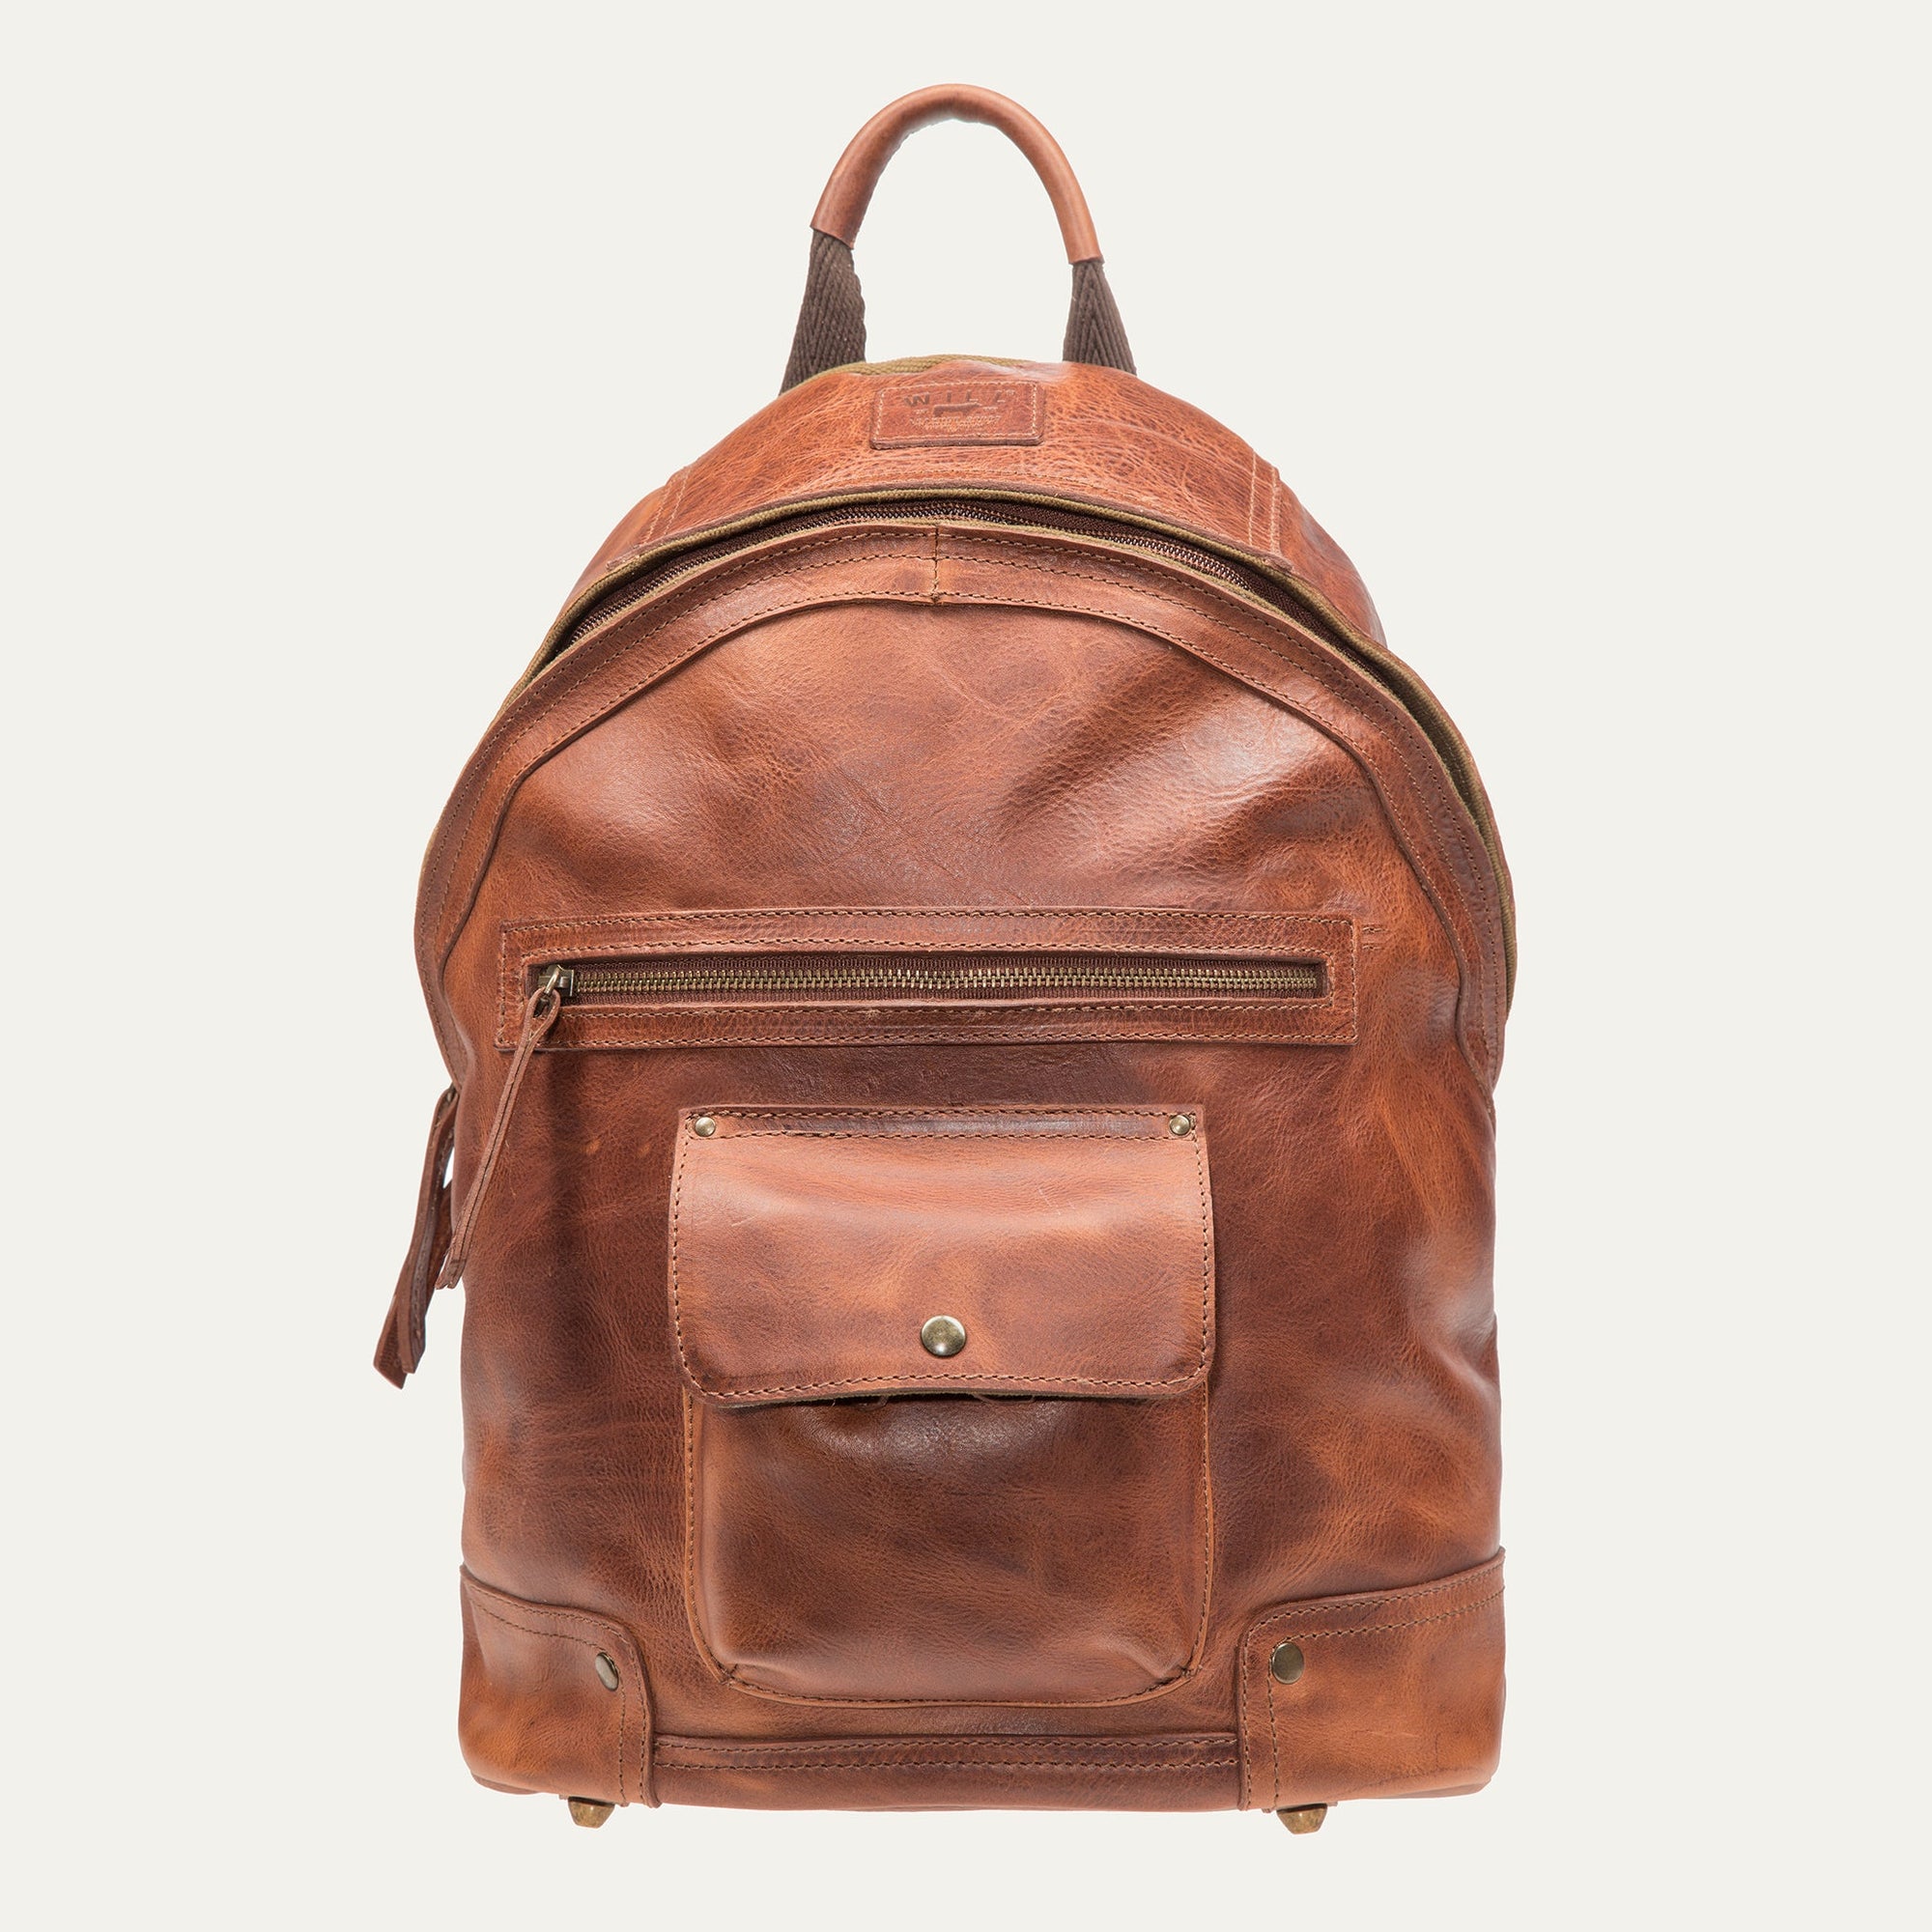 Silas Leather Backpack in Cognac by Will Leather Goods